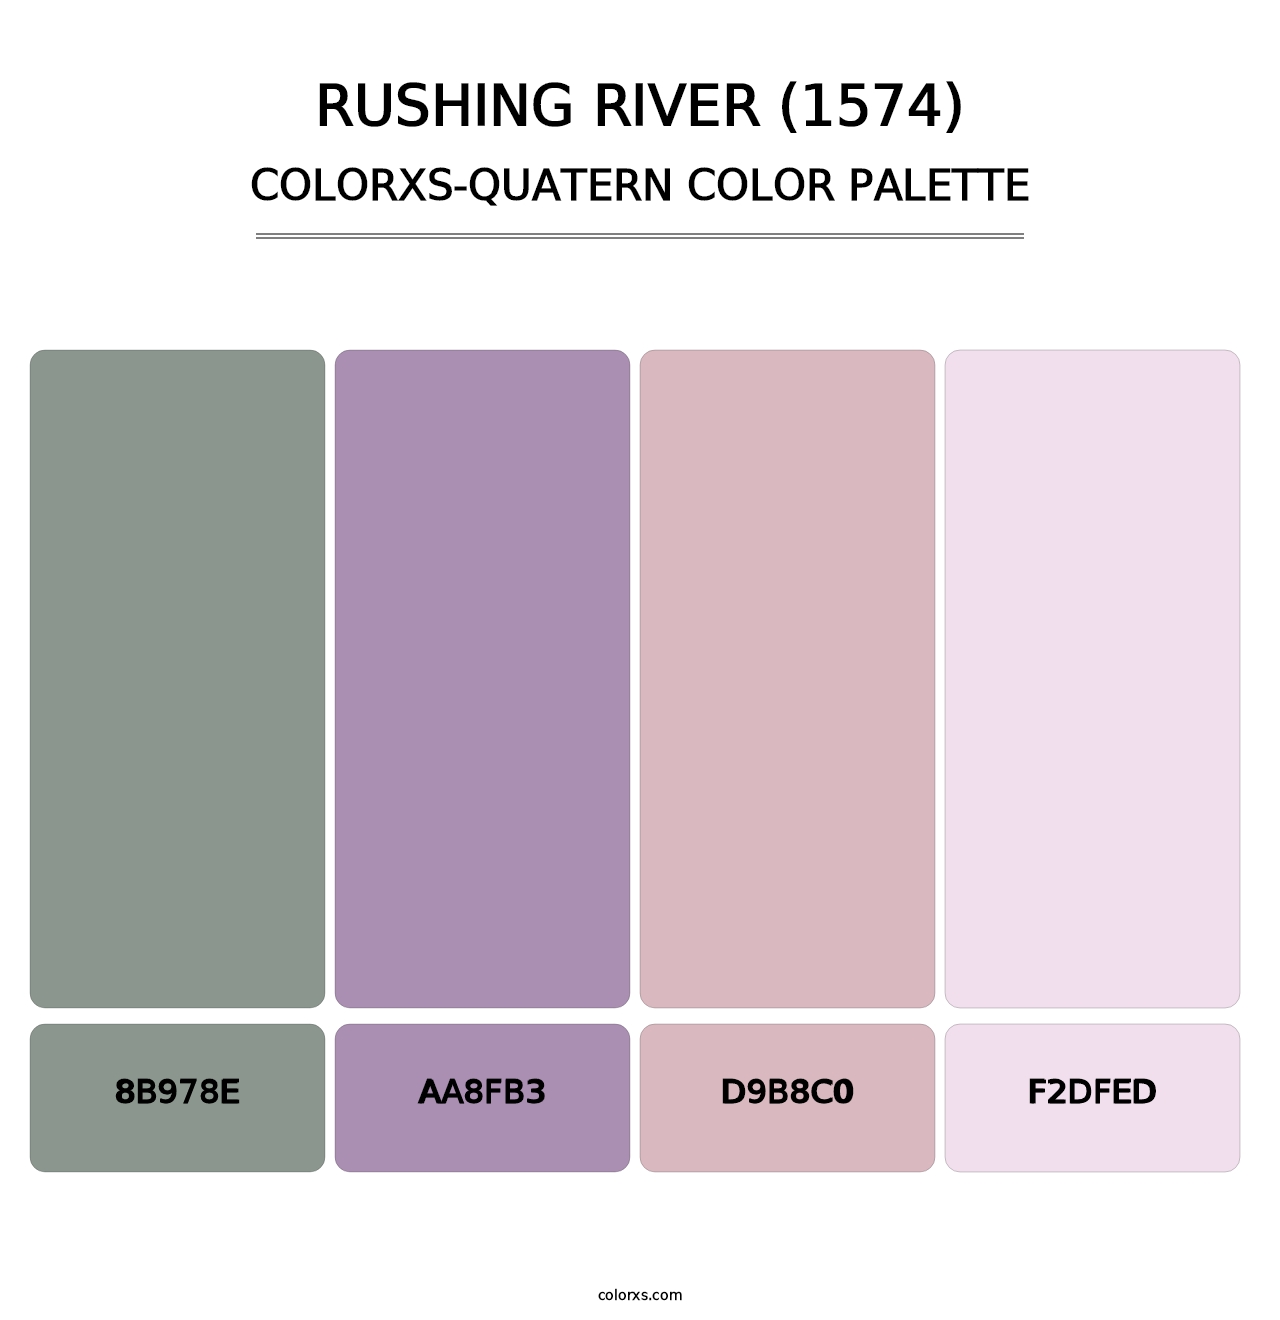 Rushing River (1574) - Colorxs Quatern Palette